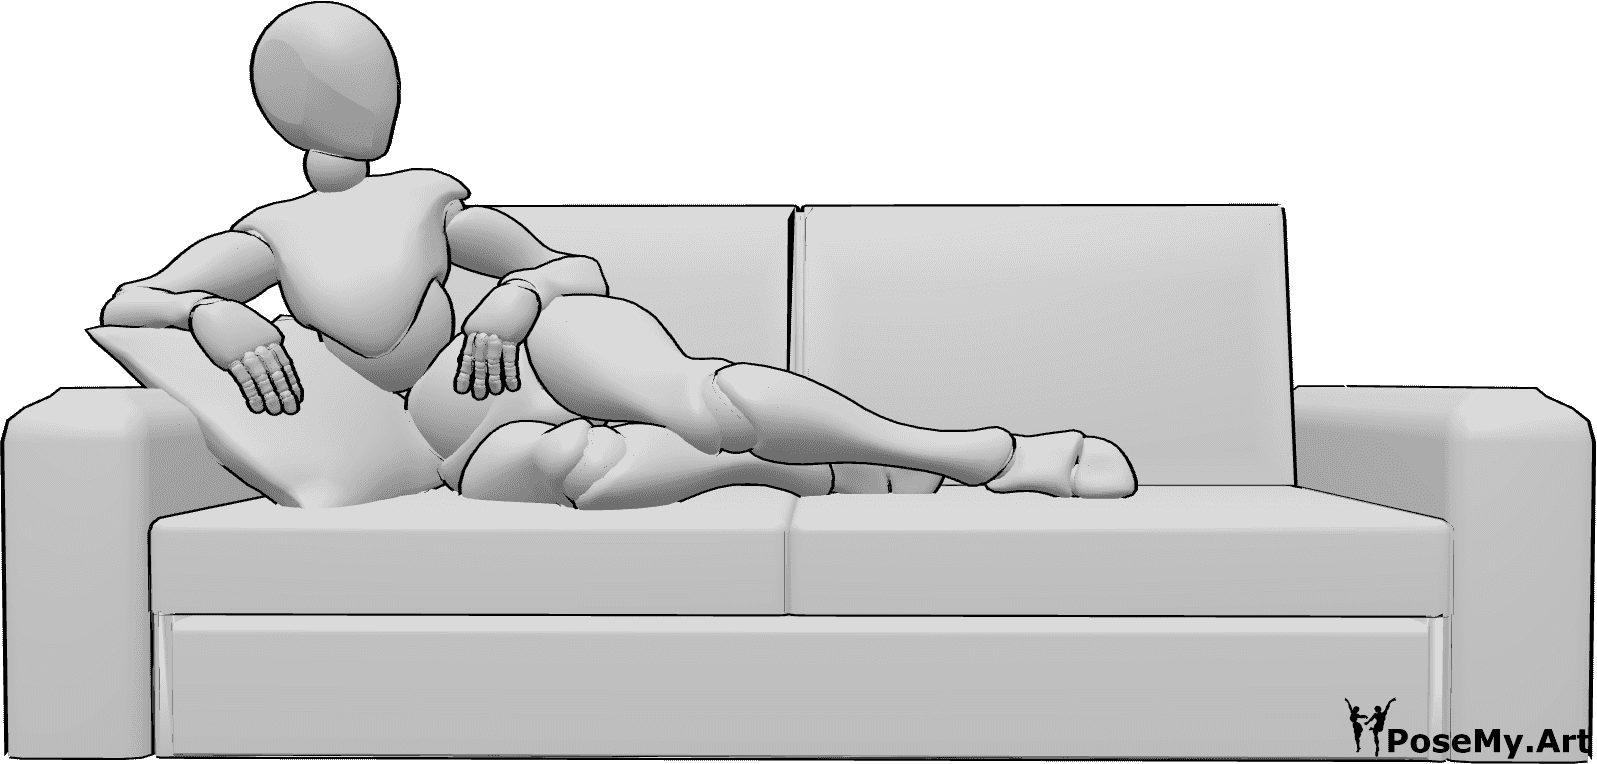 Pose Reference- Female comfortable lying pose - Female is lying comfortably on the couch and looking to the left